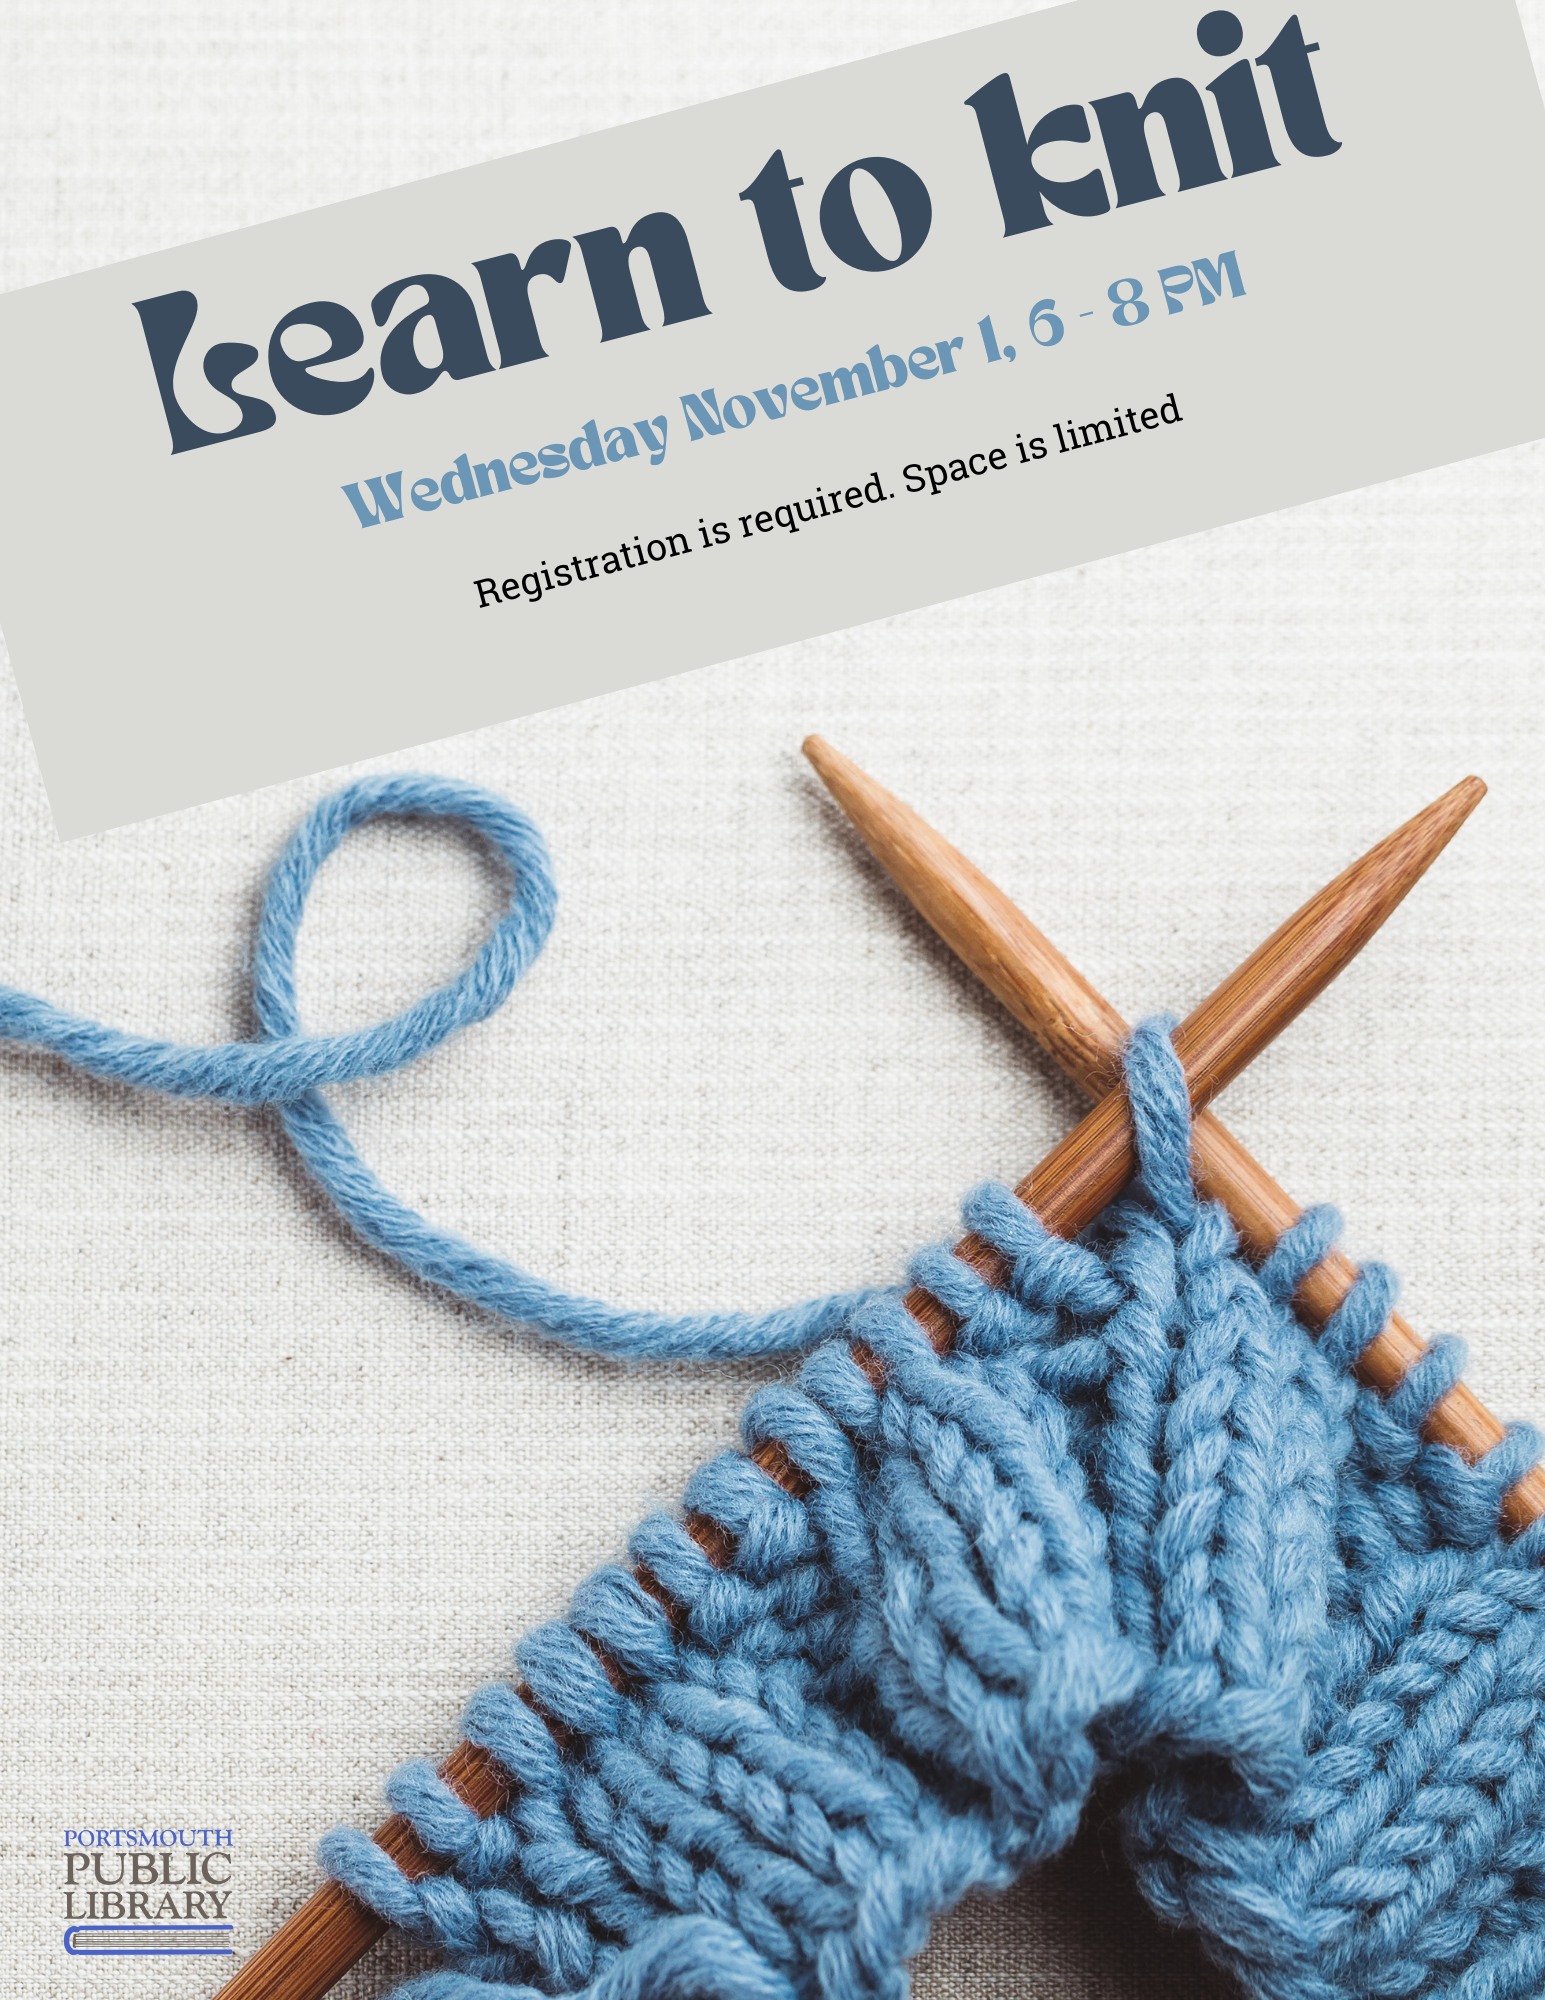 Learn to Knit Wednesday November 1 6-8 PM Registration is required. Knitting needles with blue yarn